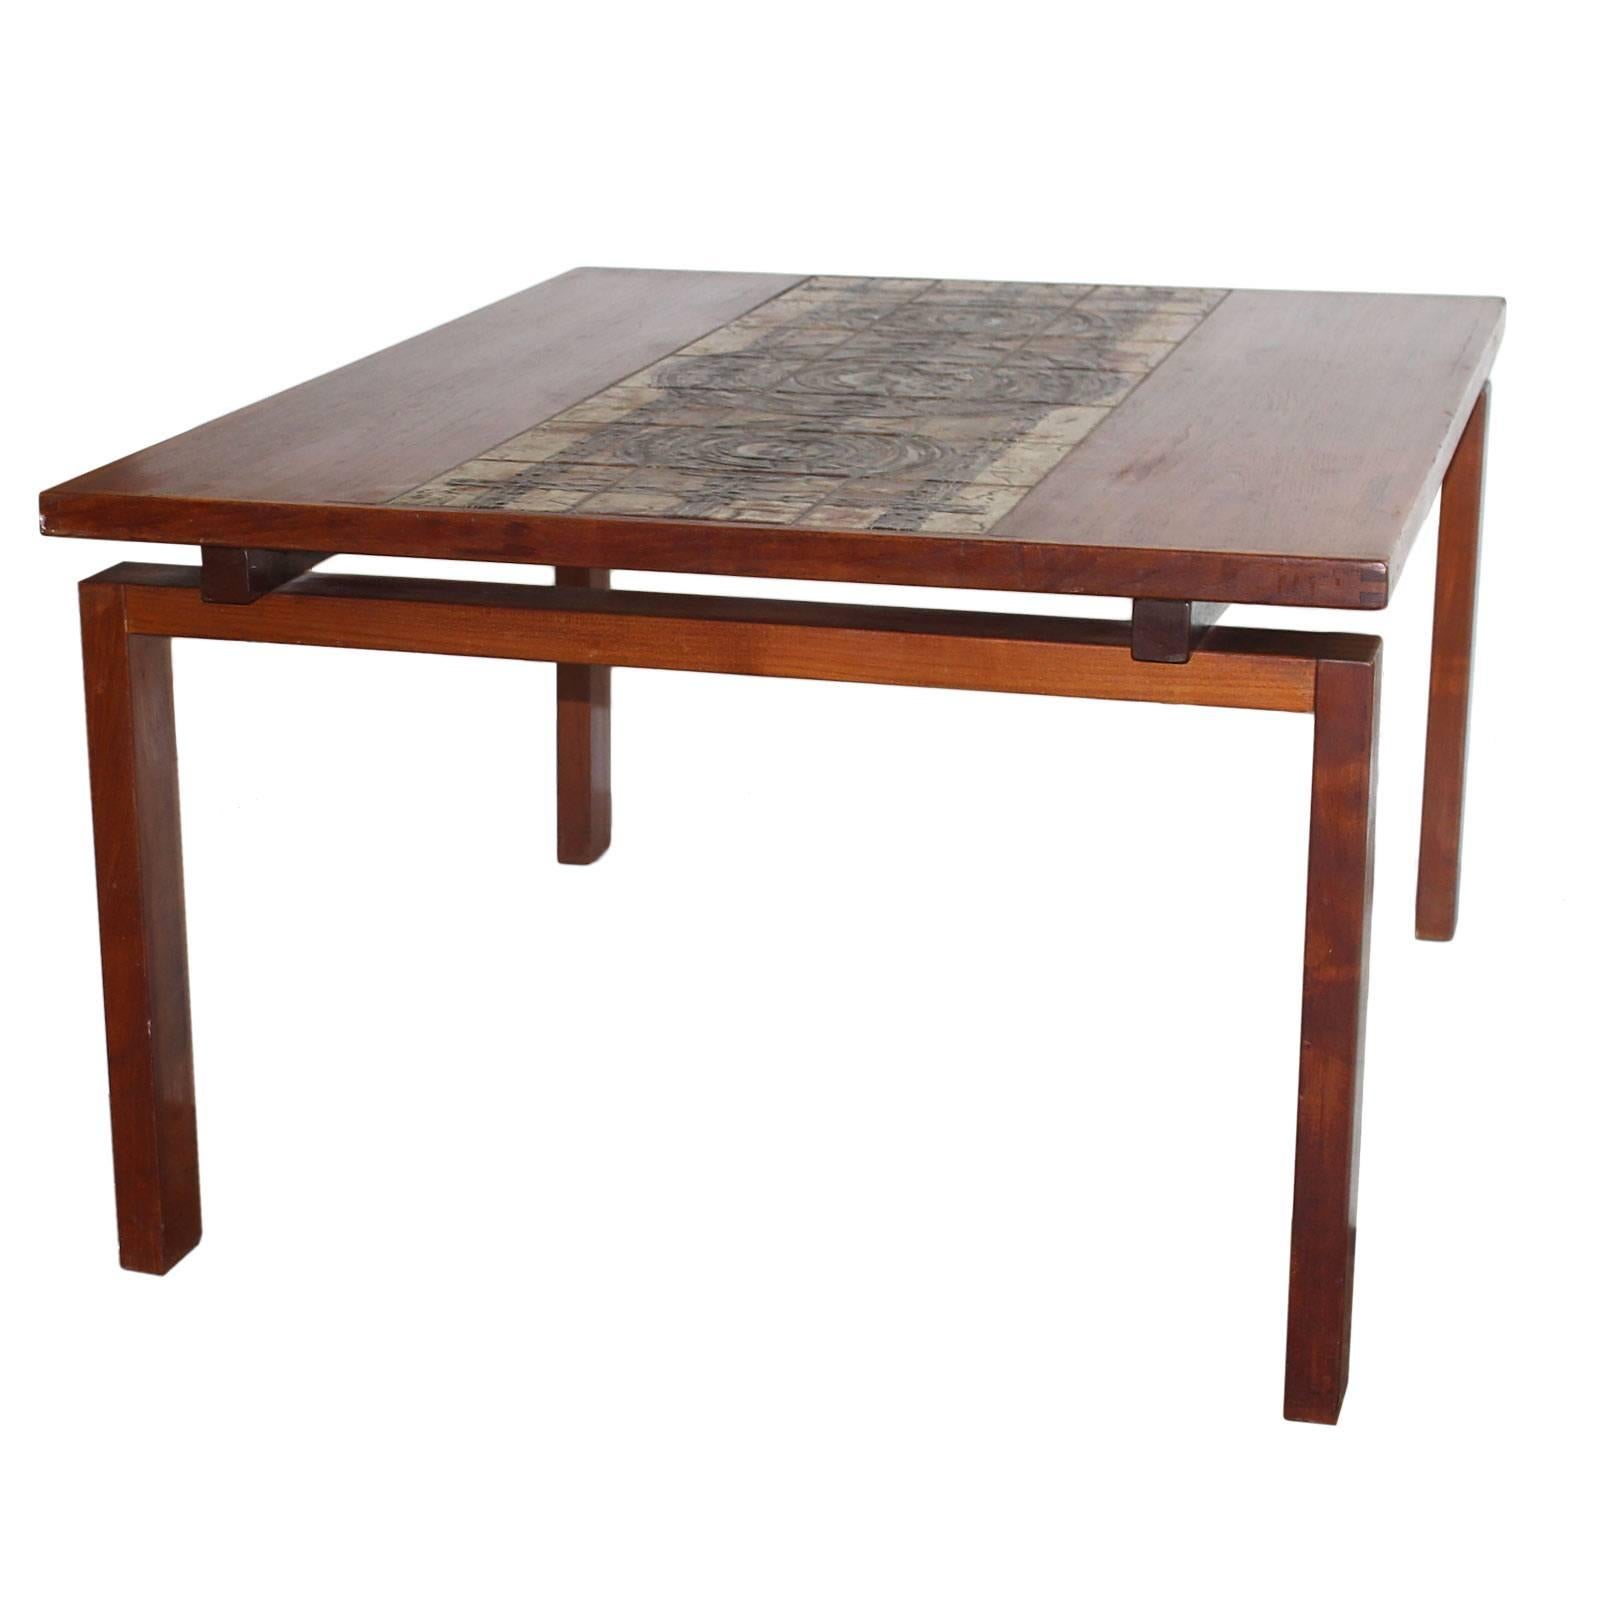 Teakwood and tile dining table by Ox Art.